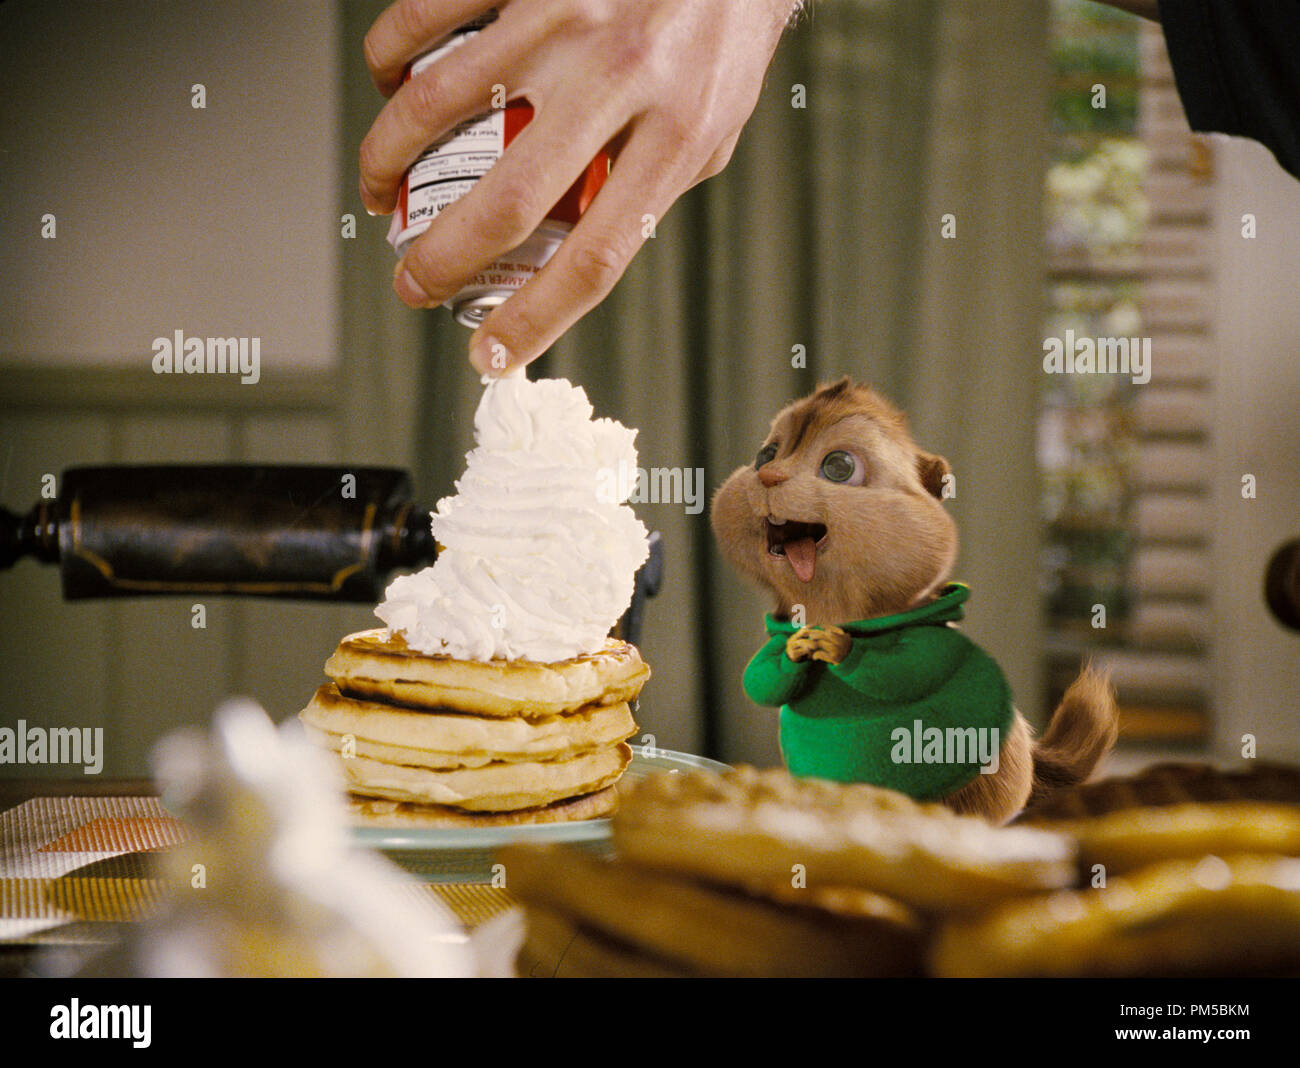 Studio Publicity Still from 'Alvin and the Chipmunks' Theodore © 2007 20th Century Fox Photo credit: Rhythm & Hues    File Reference # 30738696THA  For Editorial Use Only -  All Rights Reserved Stock Photo